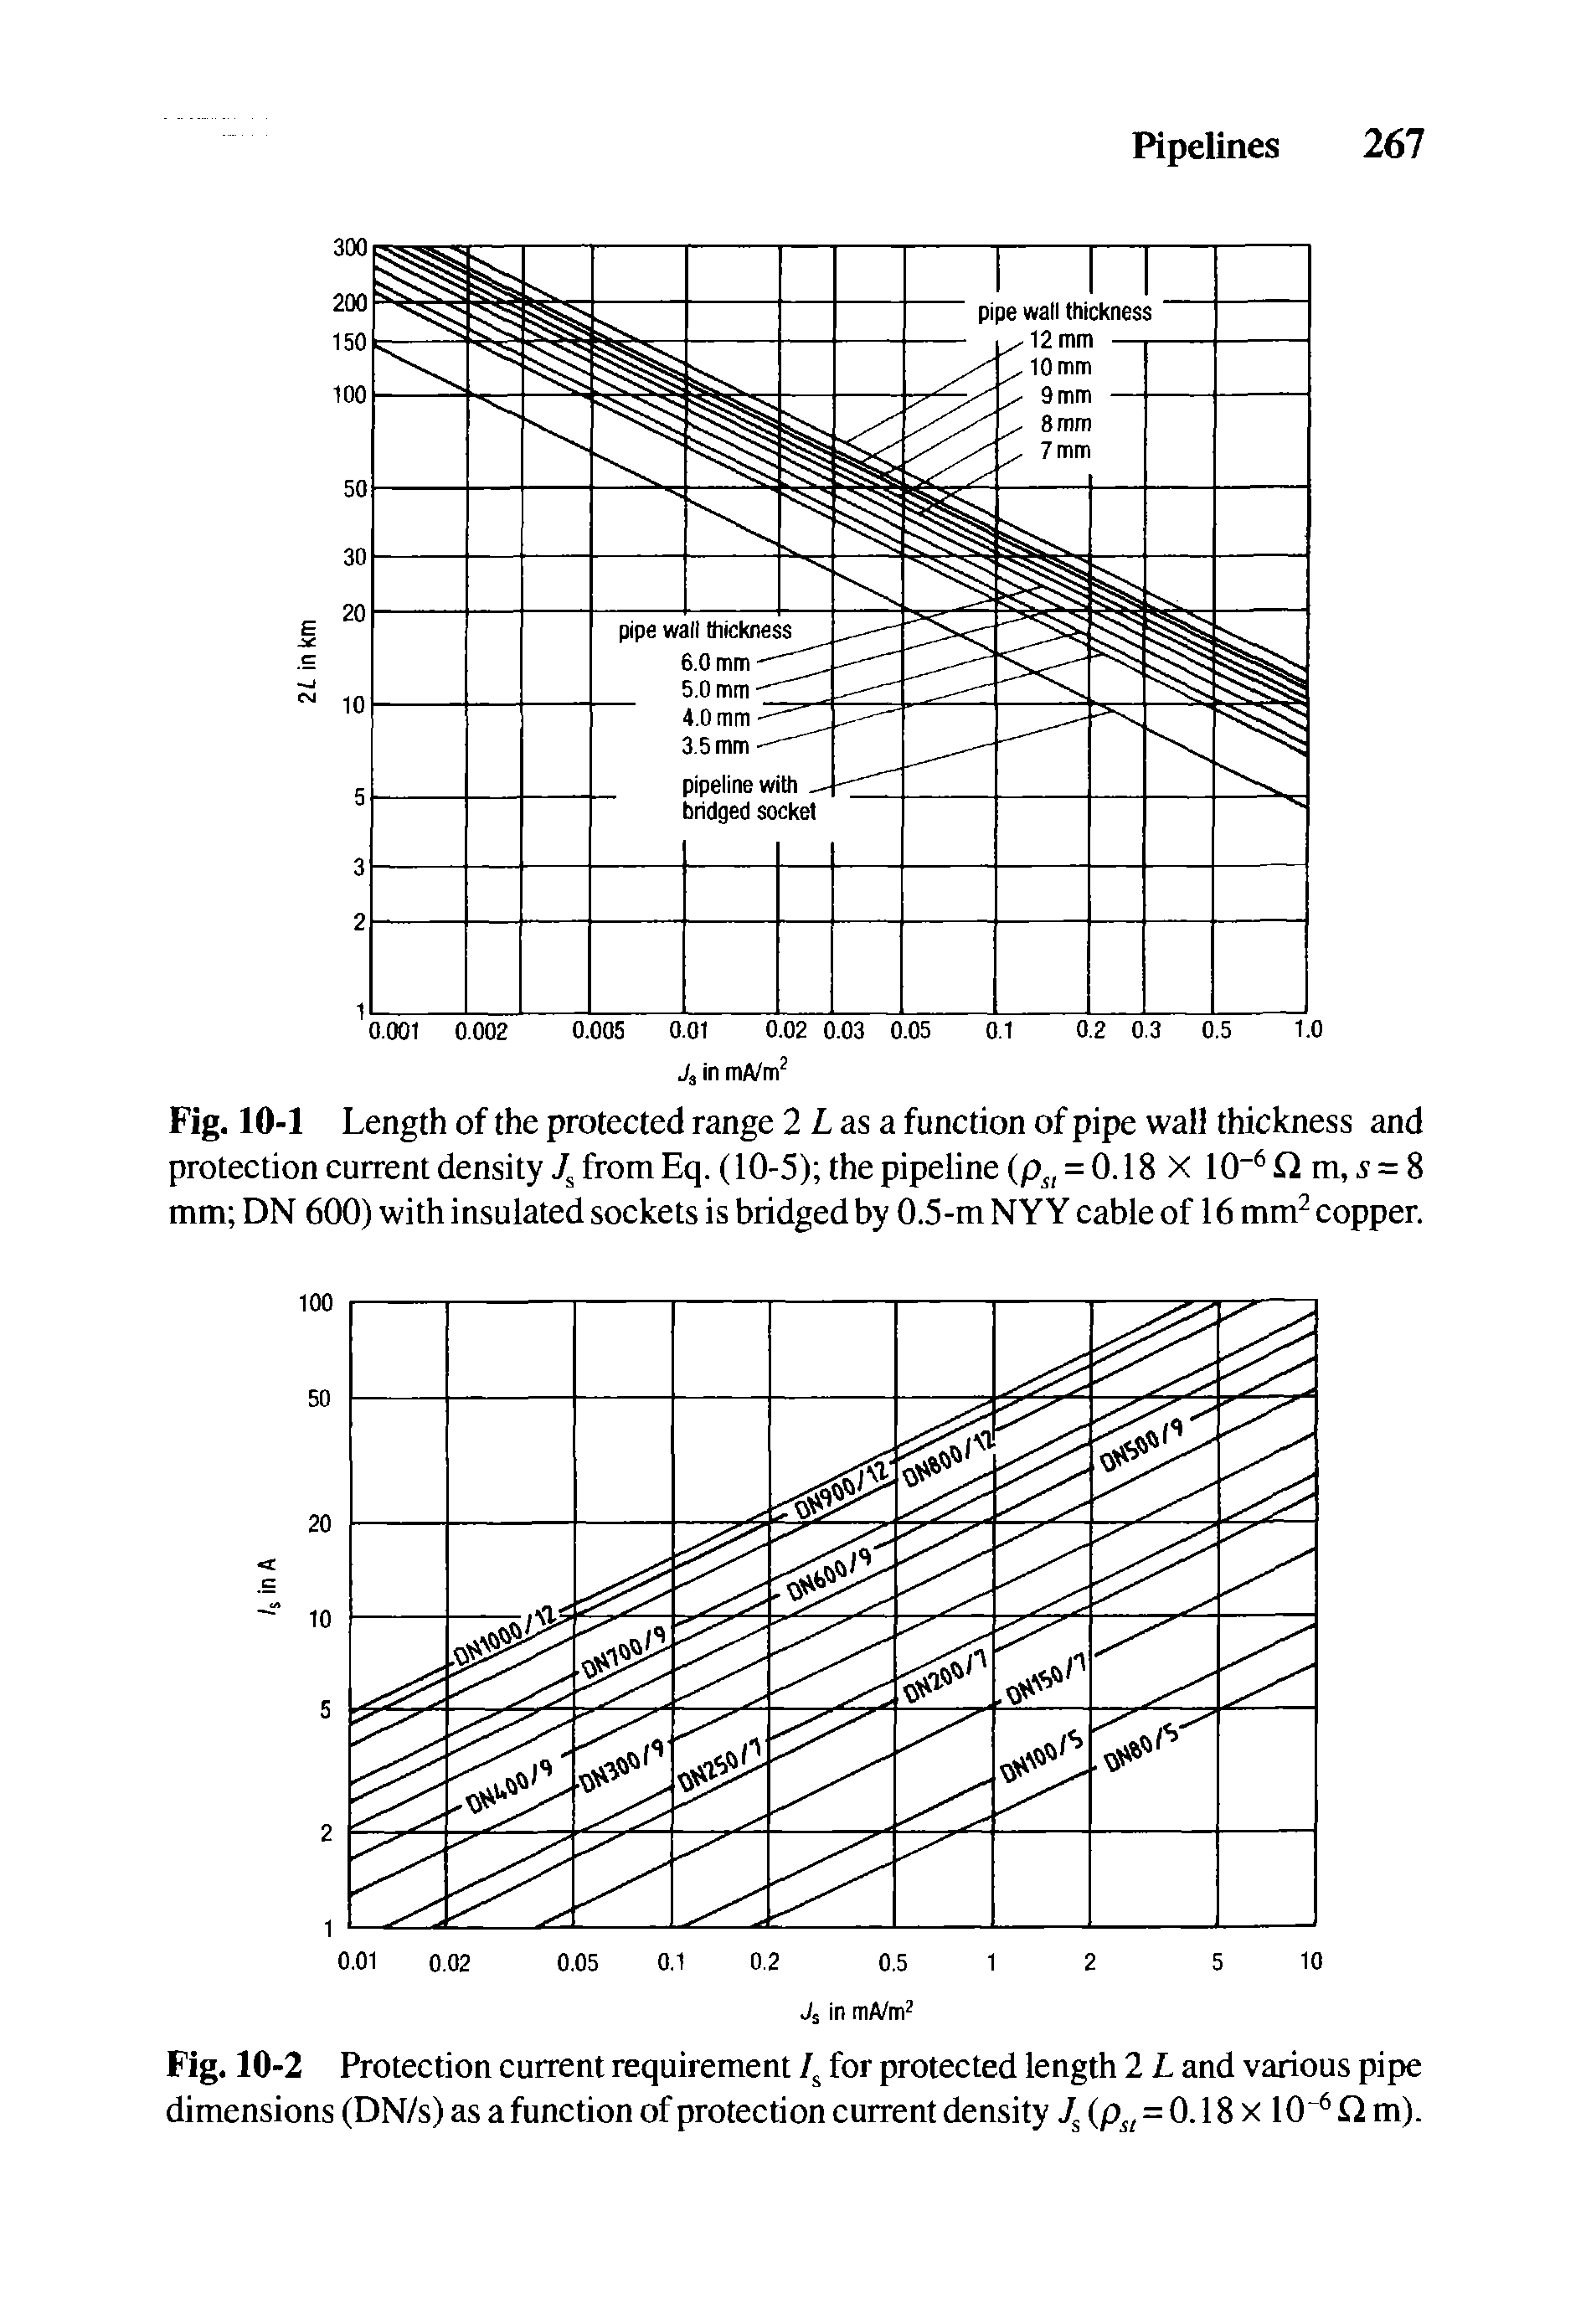 Fig. 10-1 Length of the protected range 2 Z- as a function of pipe wall thickness and proteetion eurrent density from Eq. (10-5) the pipeline (p, = 0.18 X 10 m, 5 = 8 mm DN 600) with insulated soekets is bridged by 0.5-m NY Y eable of 16 mm eopper.